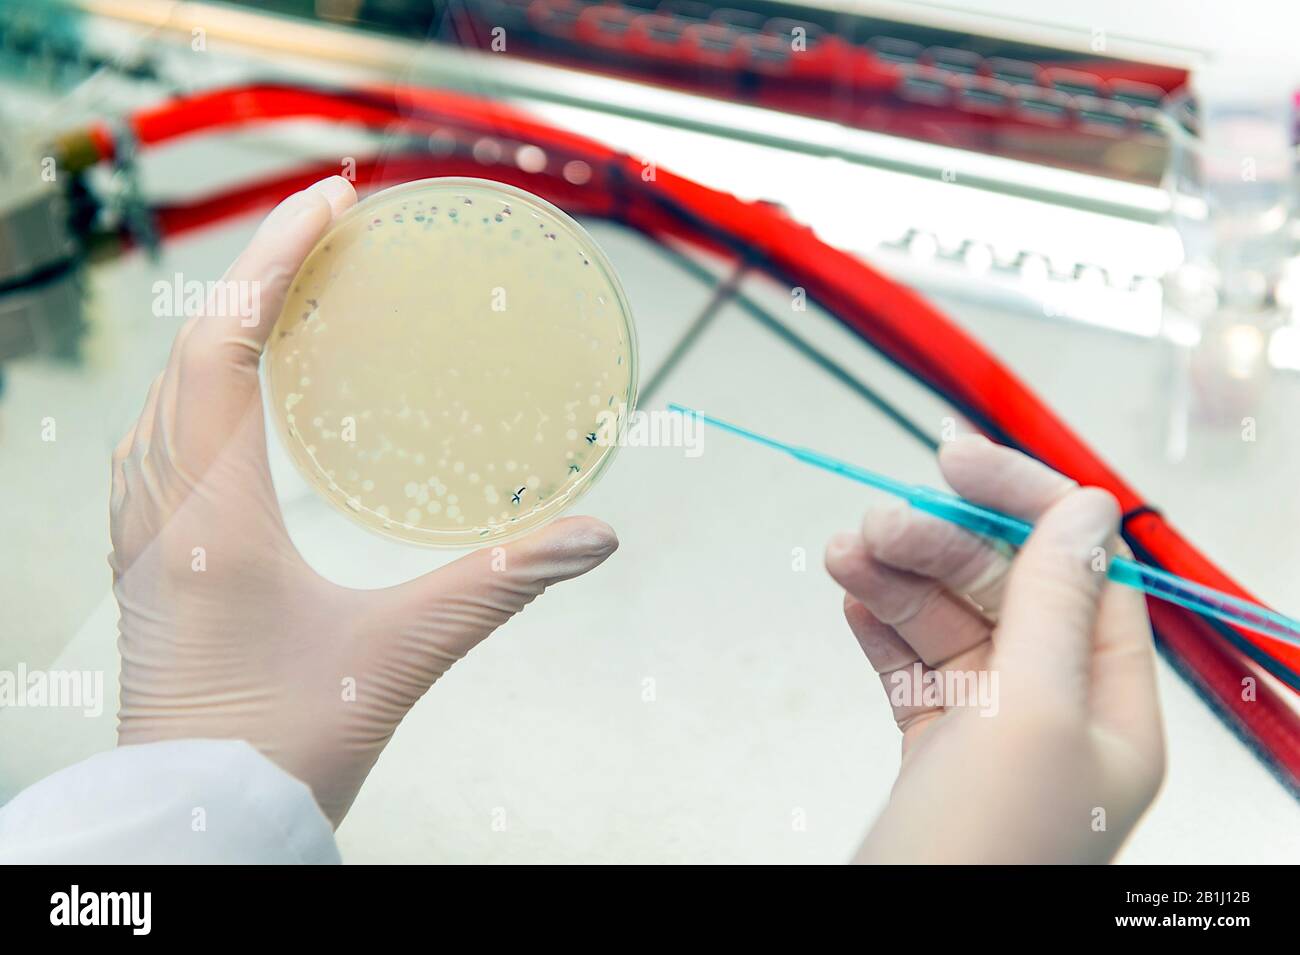 hands usind needle are picking bacteriophage plaque Stock Photo